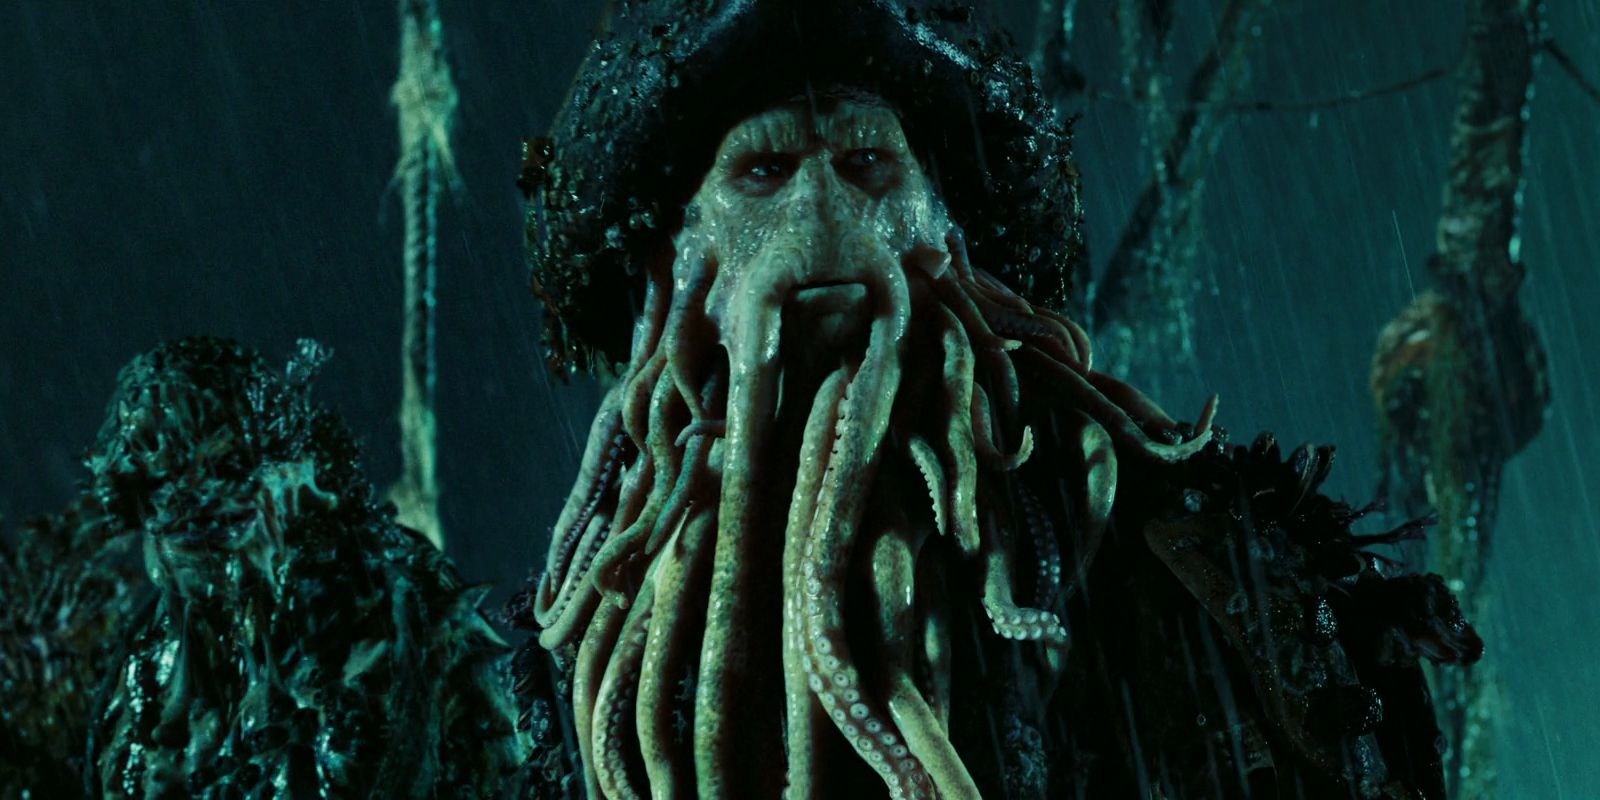 Davy Jones stands on his ship in Pirates of the Caribbean: Dead Man's Chest